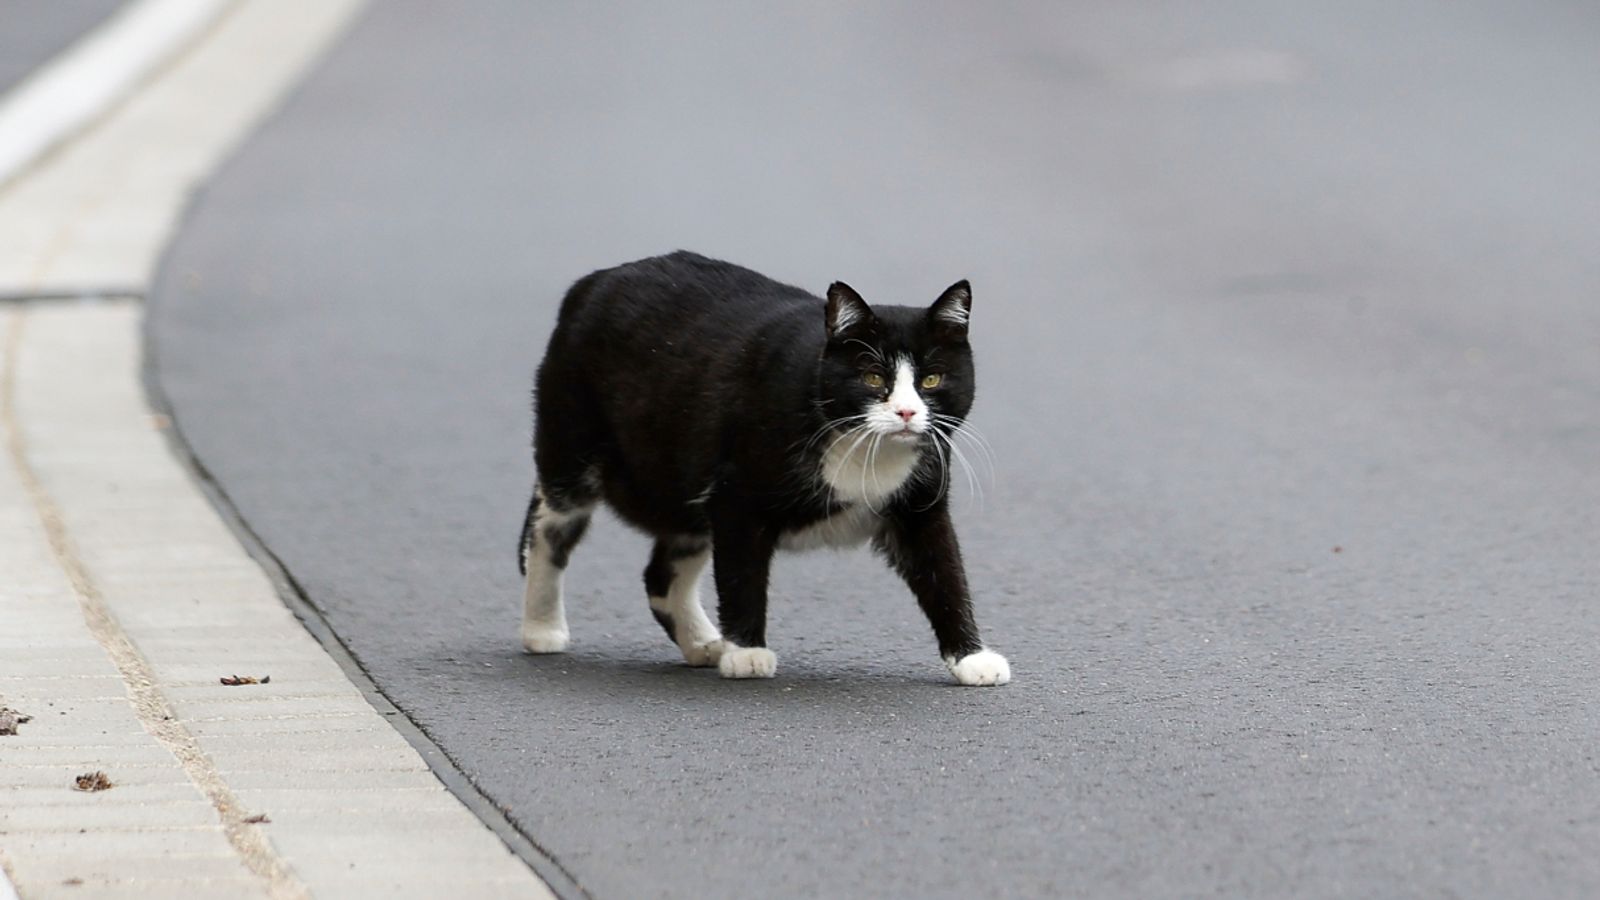 Australian council to ban cats outside unless they are on a lead